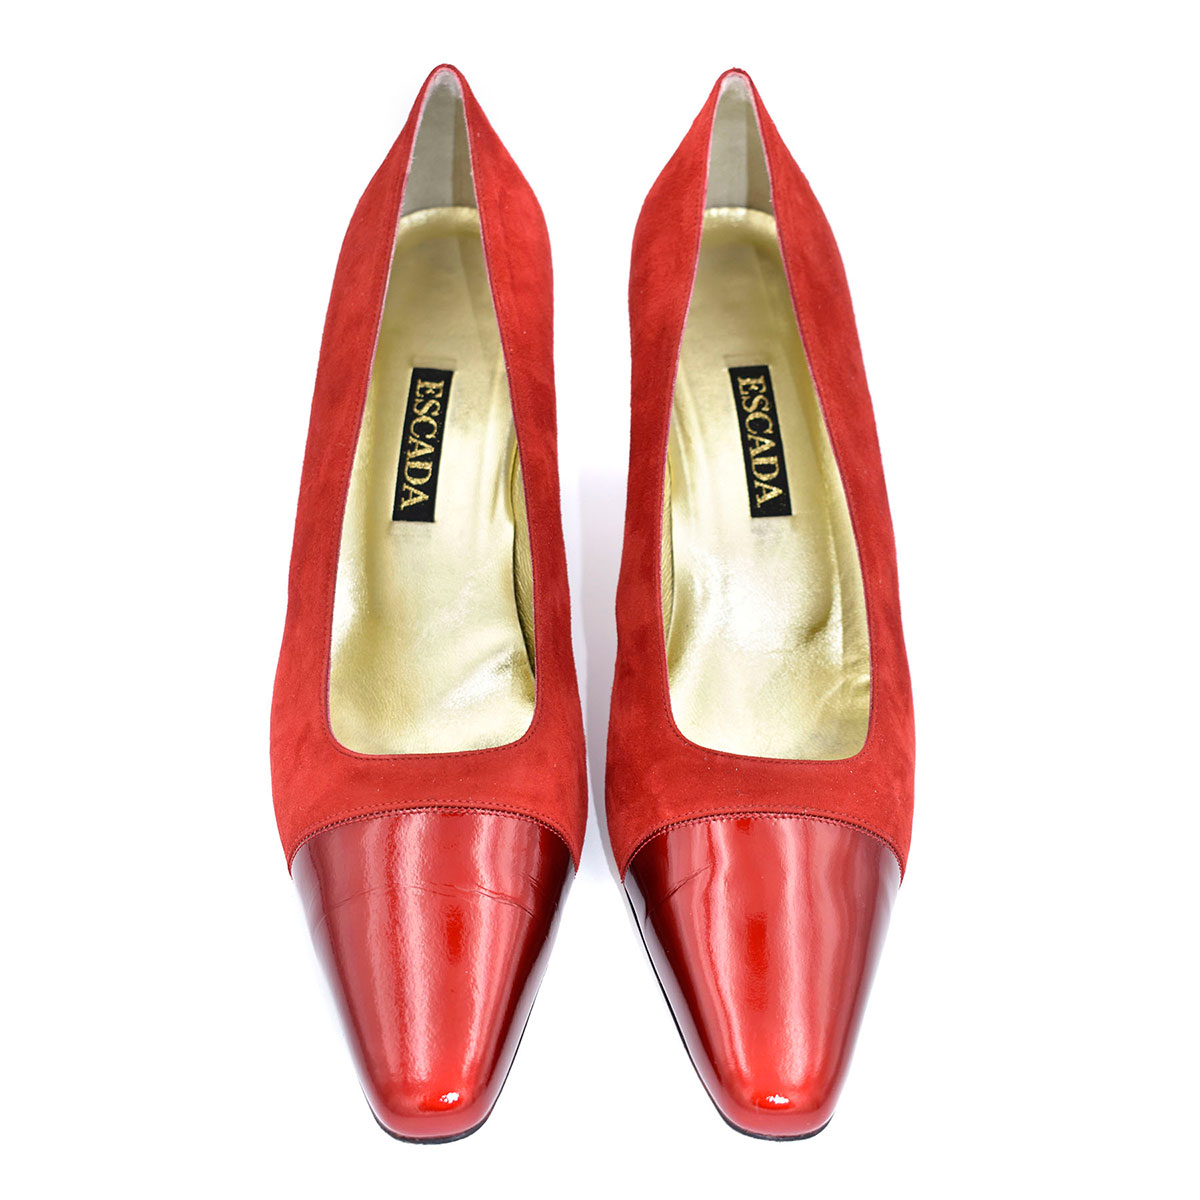 Escada Classic Holiday Red Suede/Patent Leather Cap Toe Heels Pumps sz ...